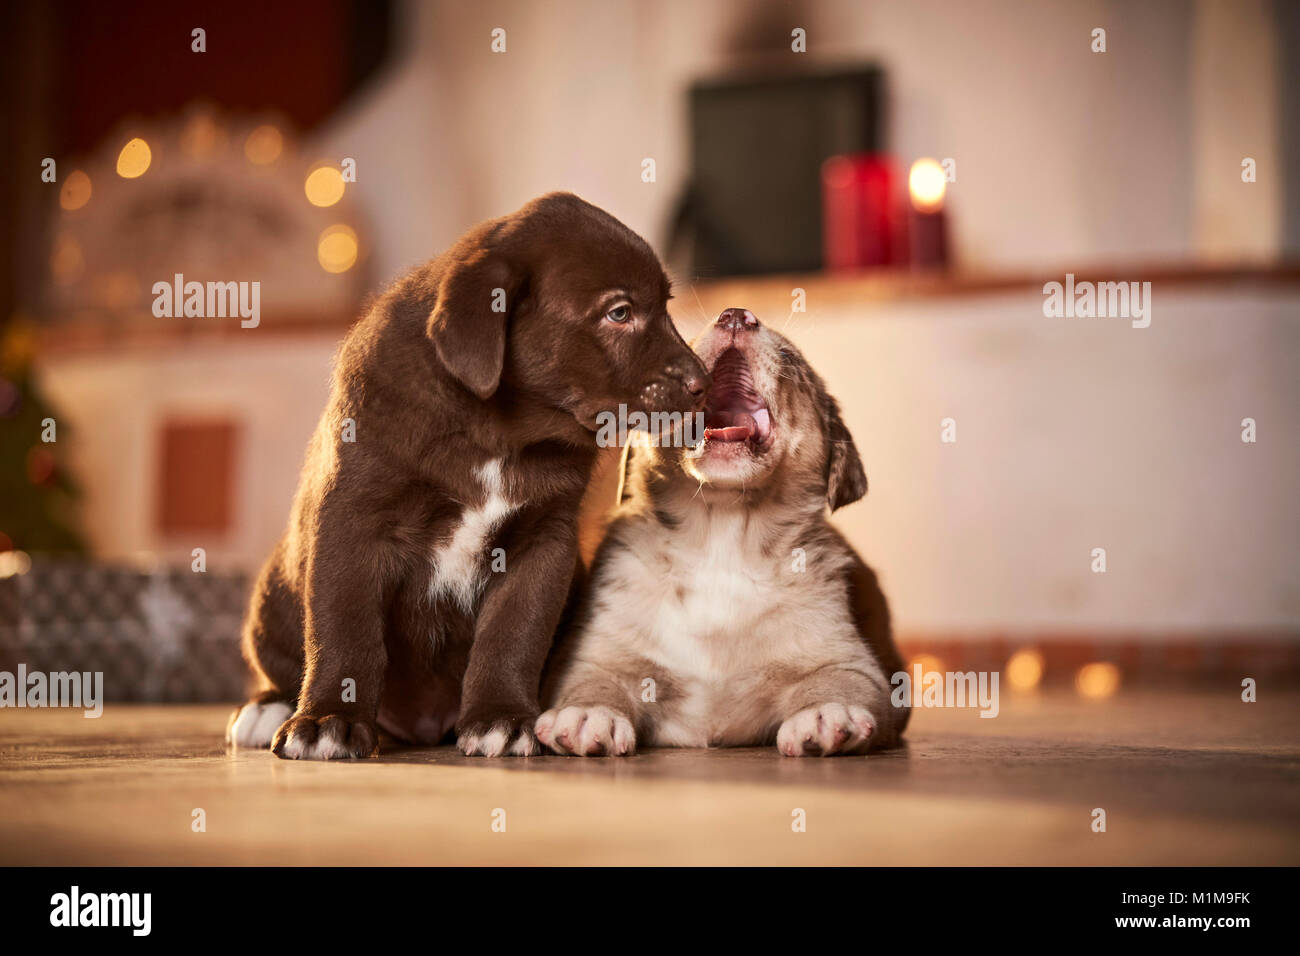 Mixed-breed dog. Two puppies in a room decorated for Christmas, one of them yawning. Germany Stock Photo